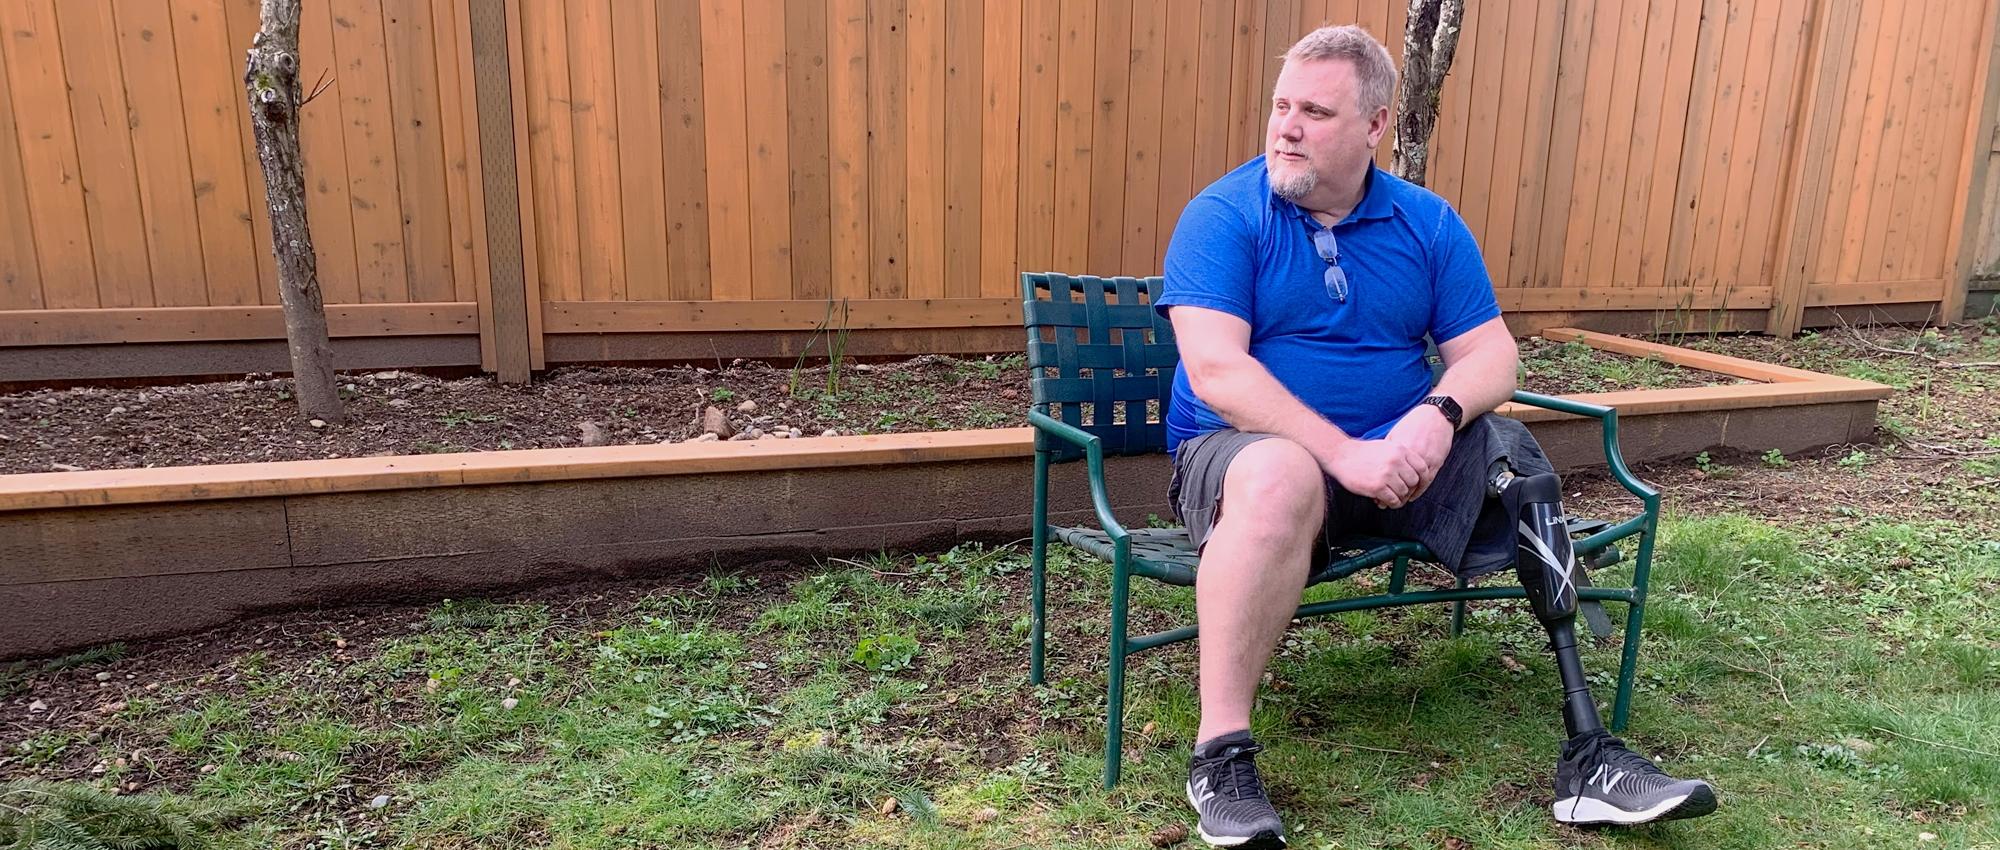 A man with a prosthetic leg sits on a bench outdoors.